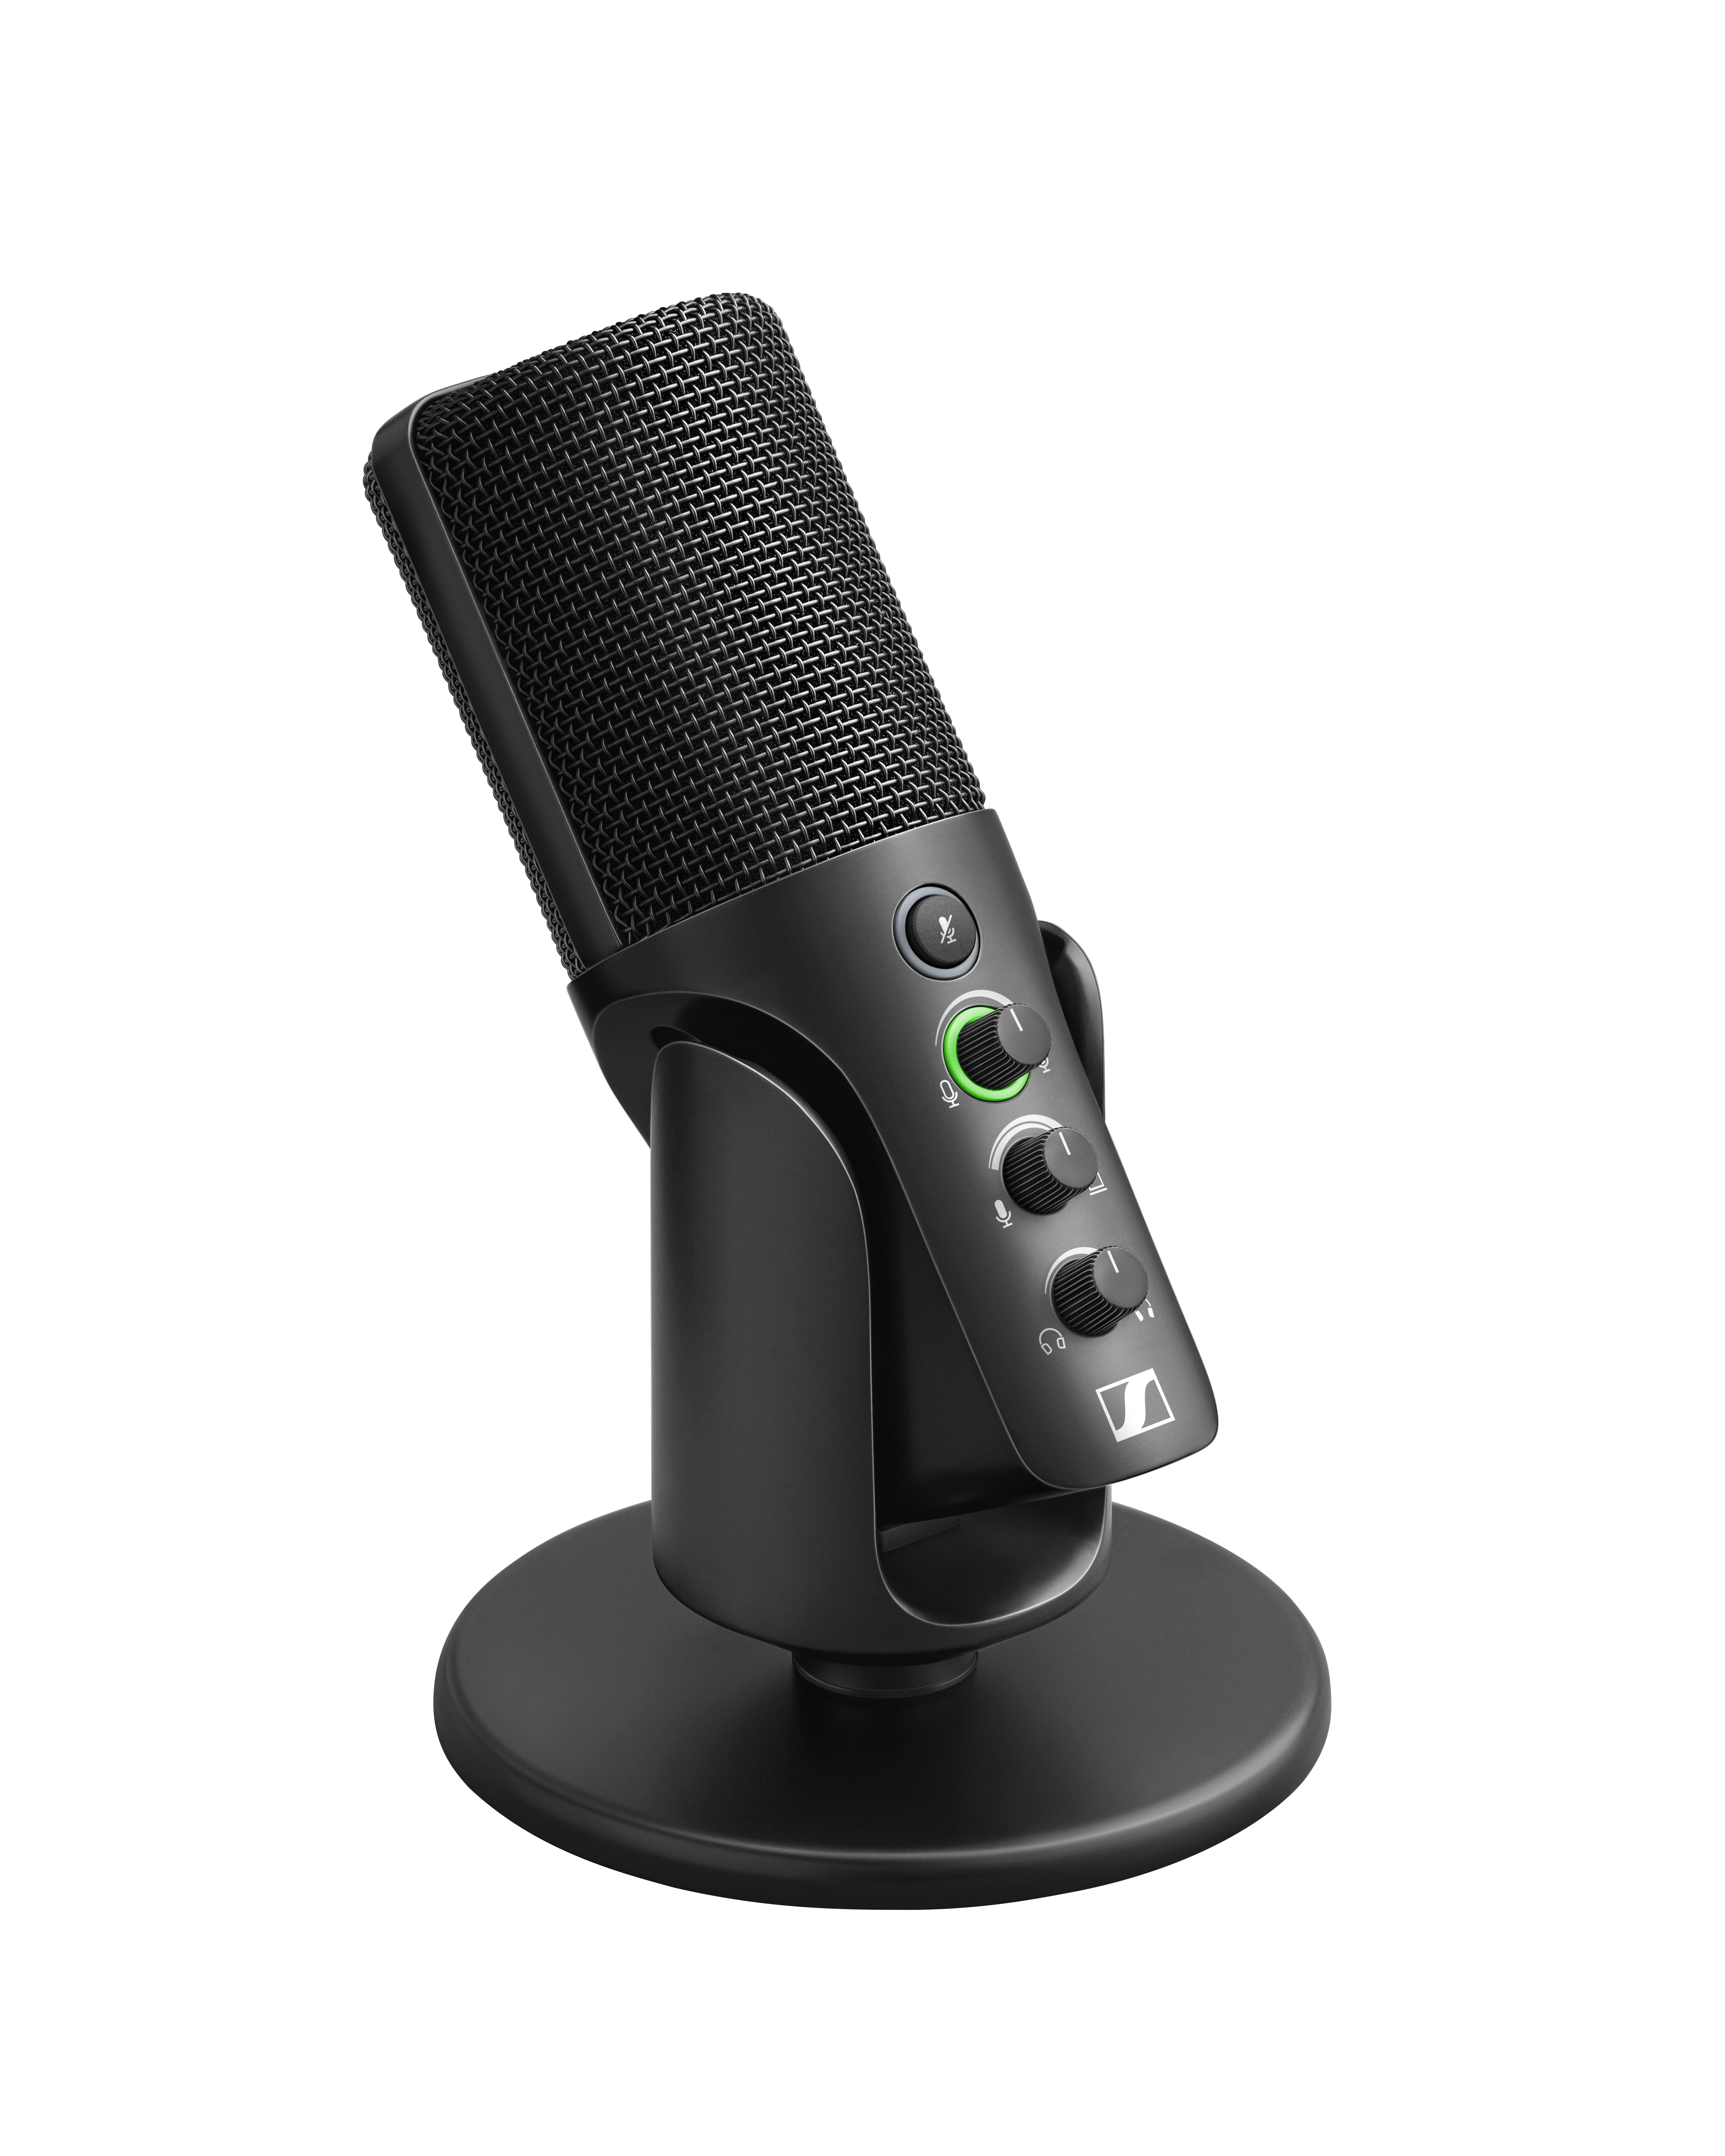 Plug-and-play simplicity meets great Sennheiser sound: the Profile USB microphone